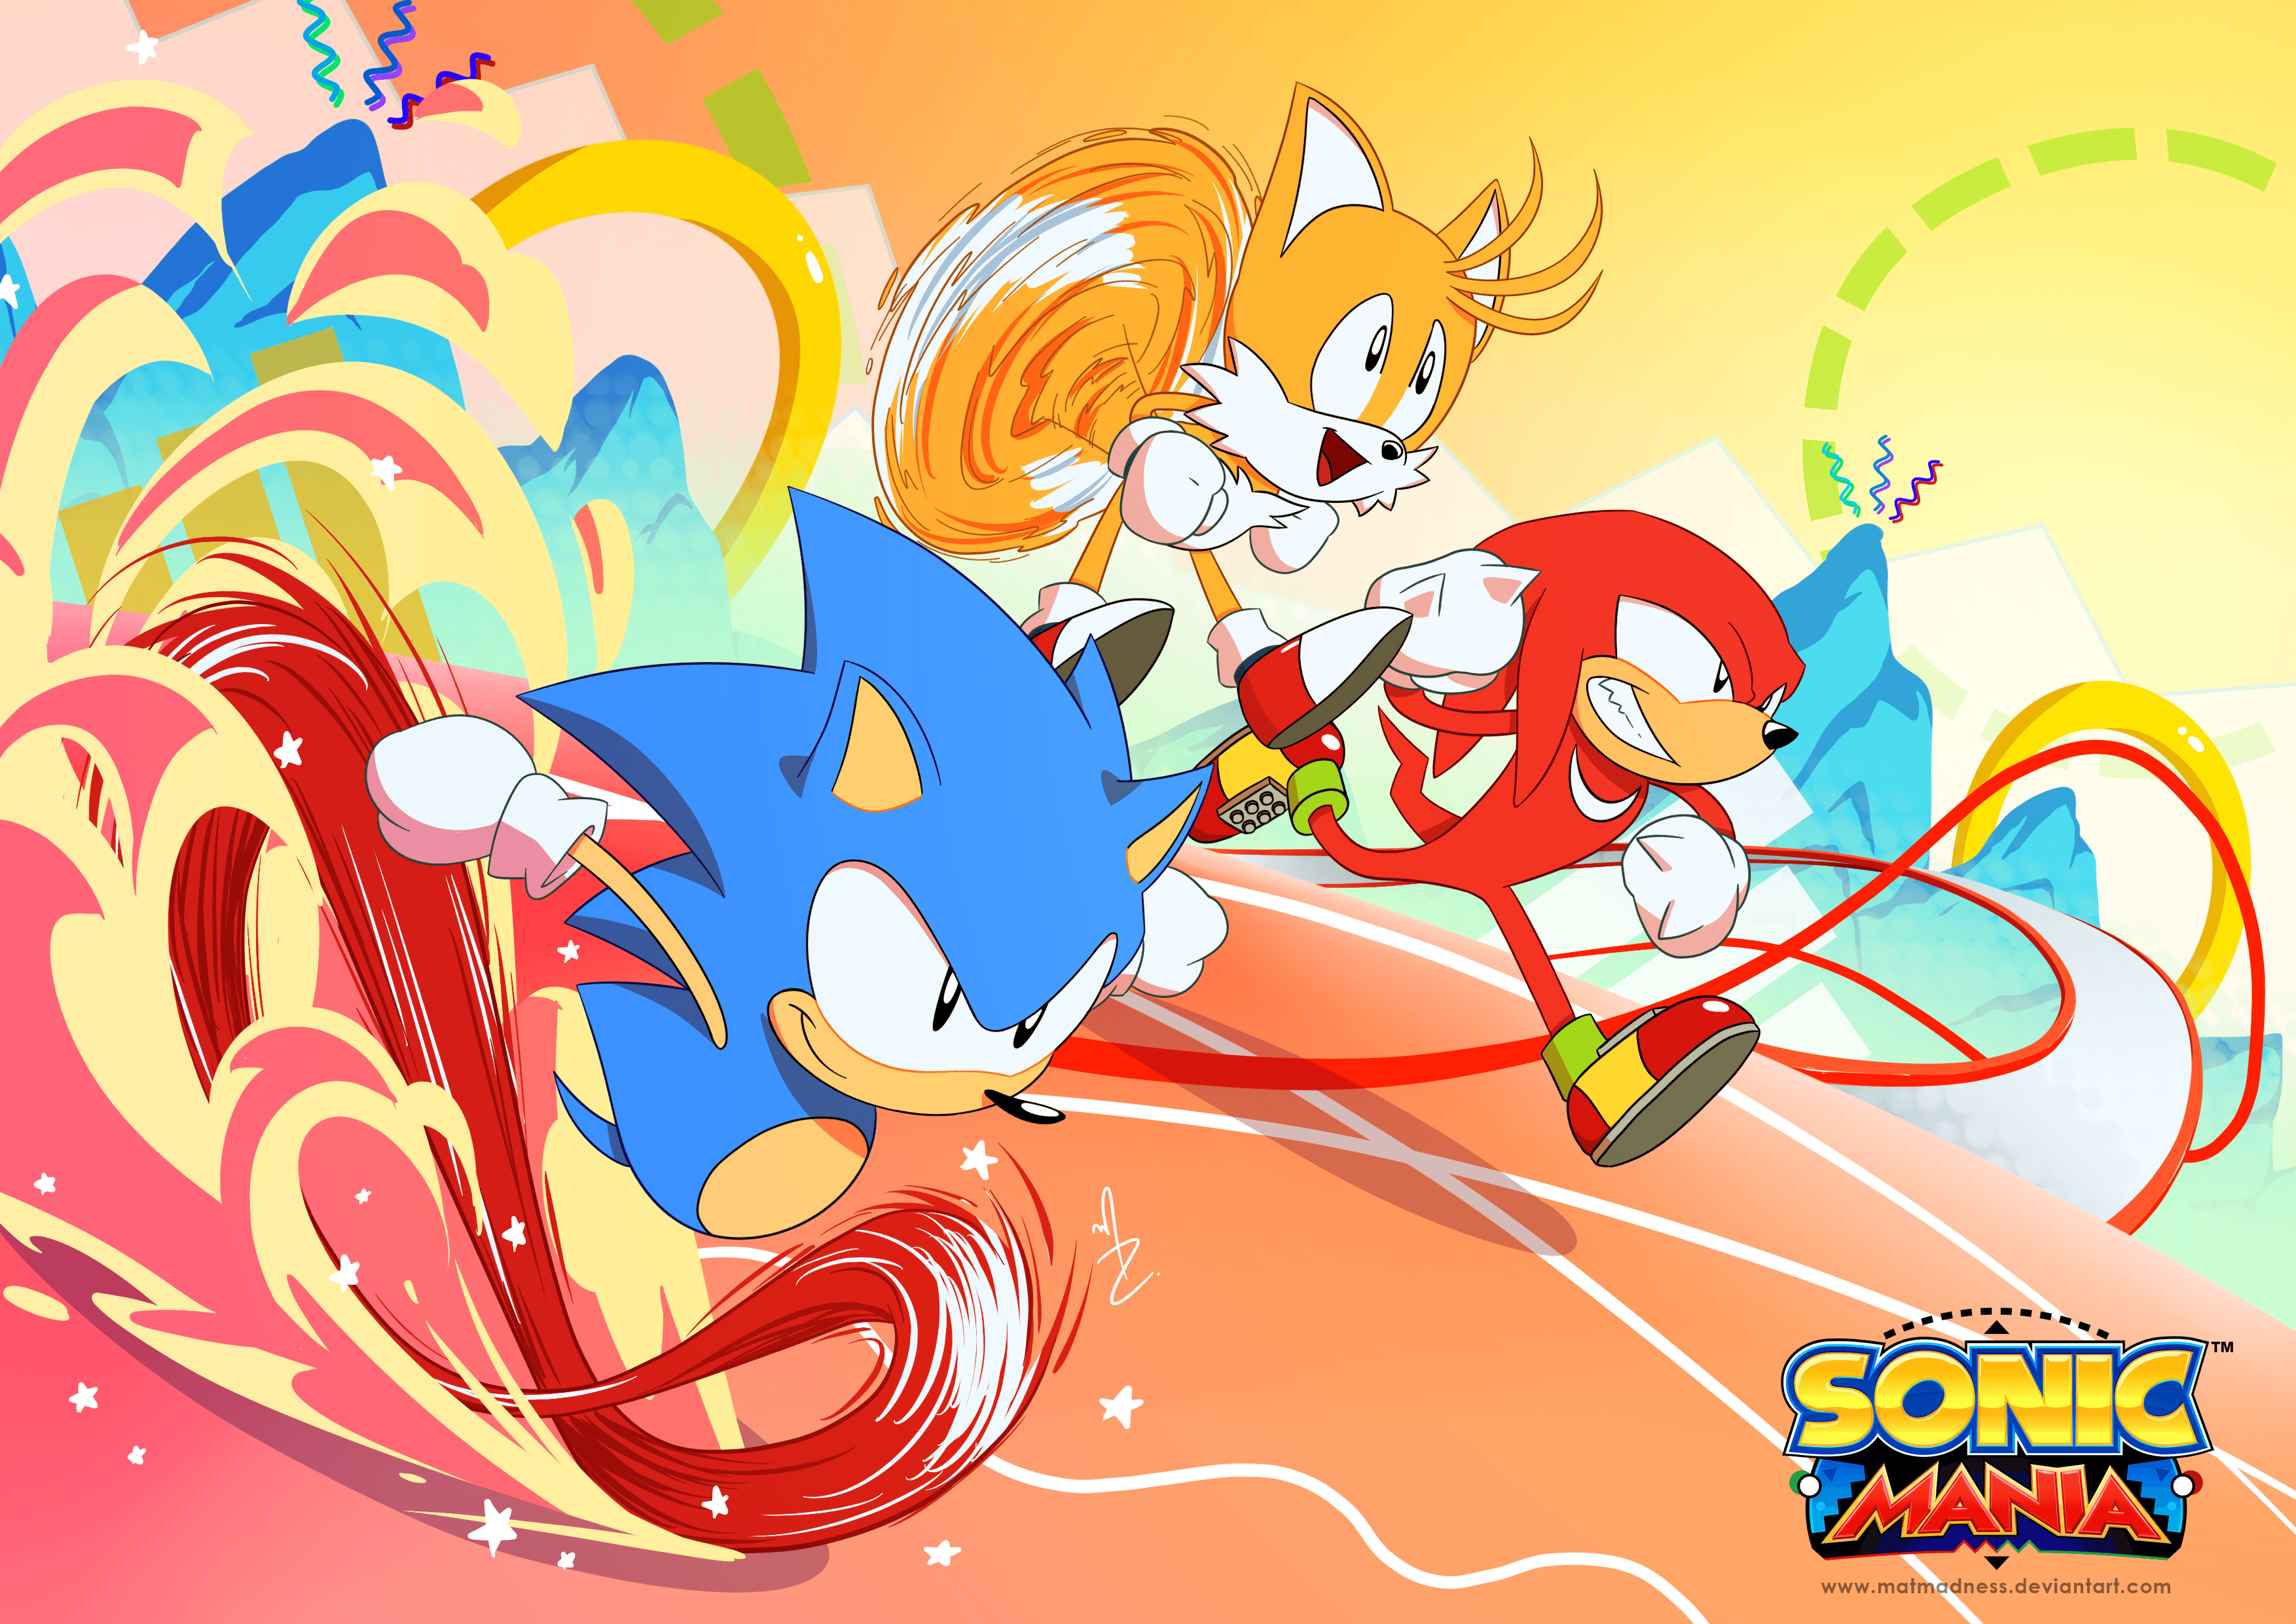 General 3507x2480 Sonic Sonic the Hedgehog Sonic Mania Sonic Mania Adventures Tails (character) Knuckles video game art video game characters Sega comic art Mania